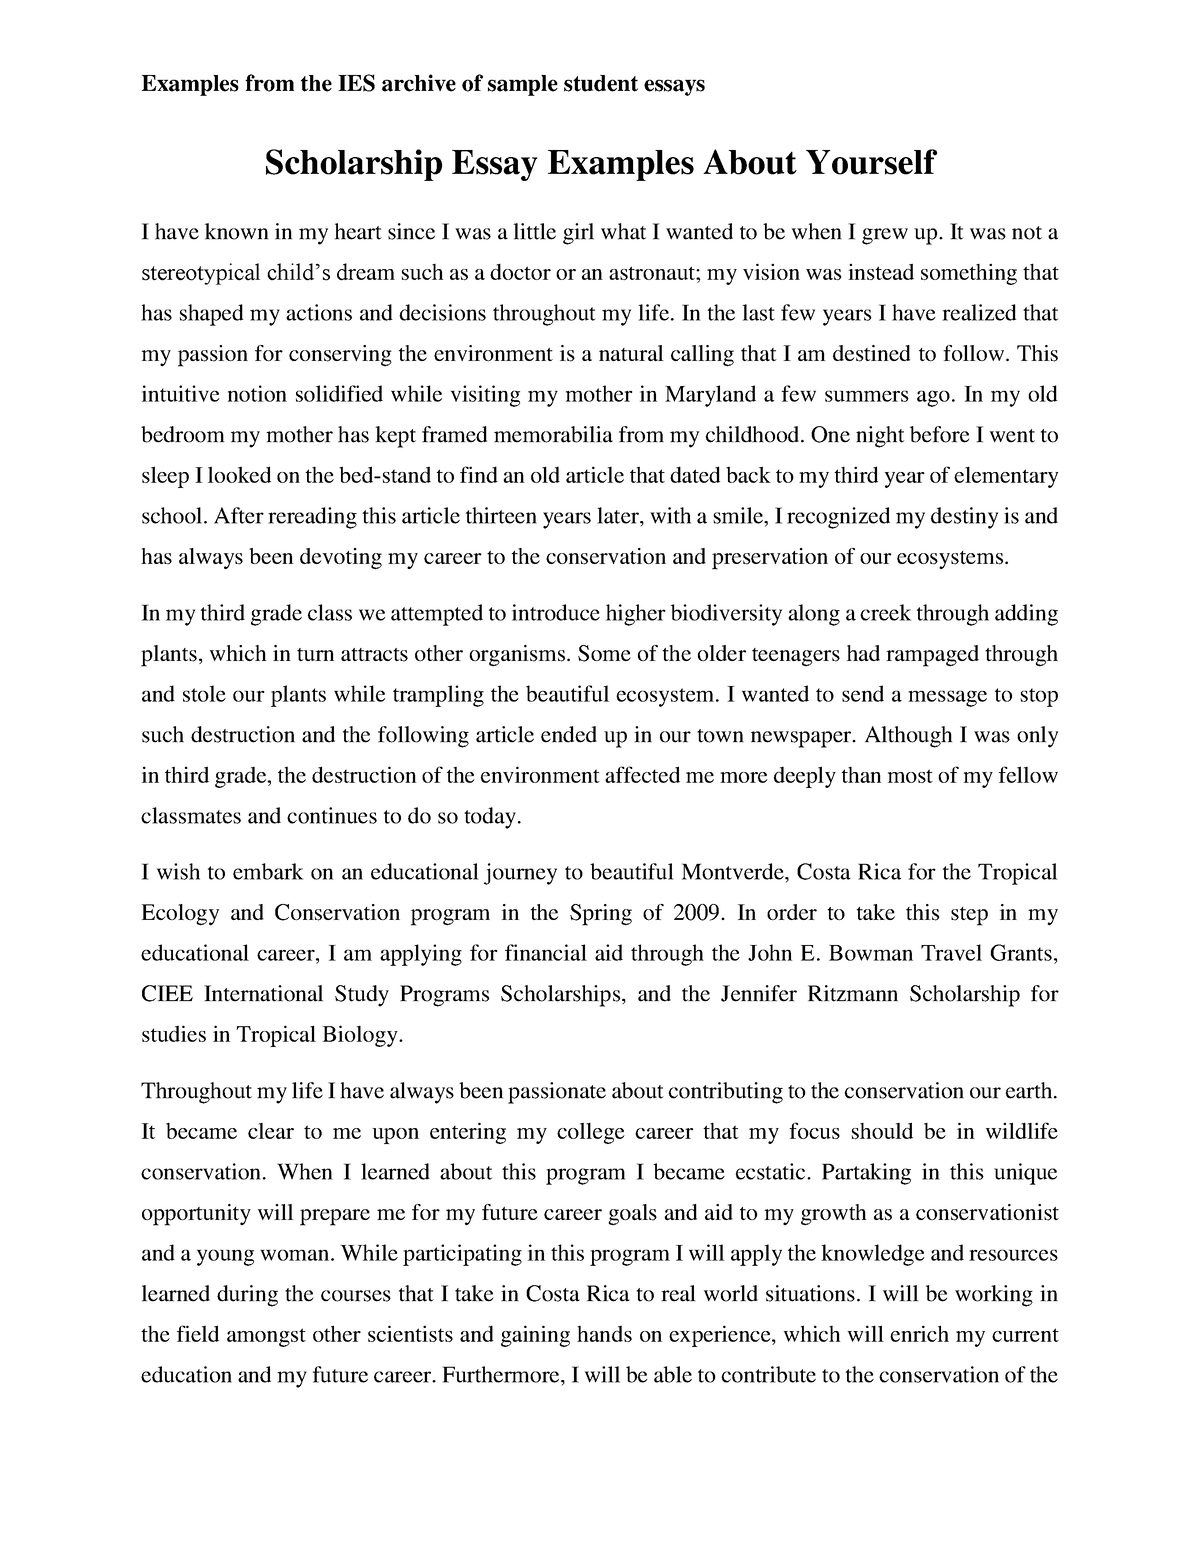 essay about yourself pdf